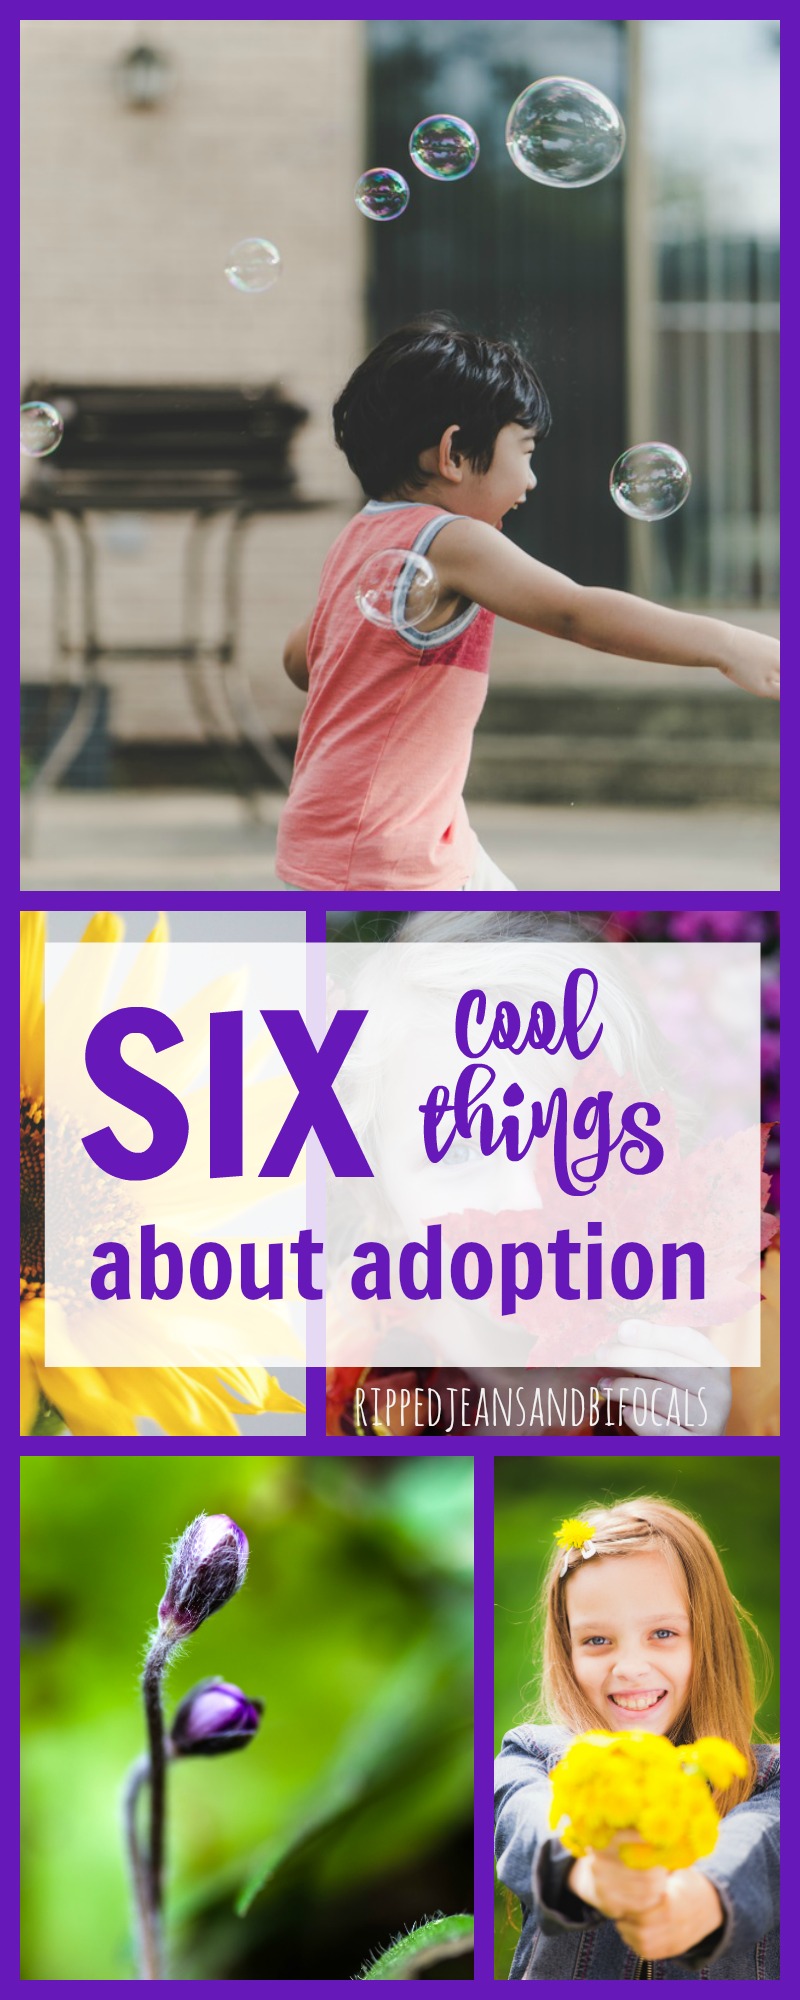 Six Cool Things About Adoption|Ripped Jeans and Bifocals